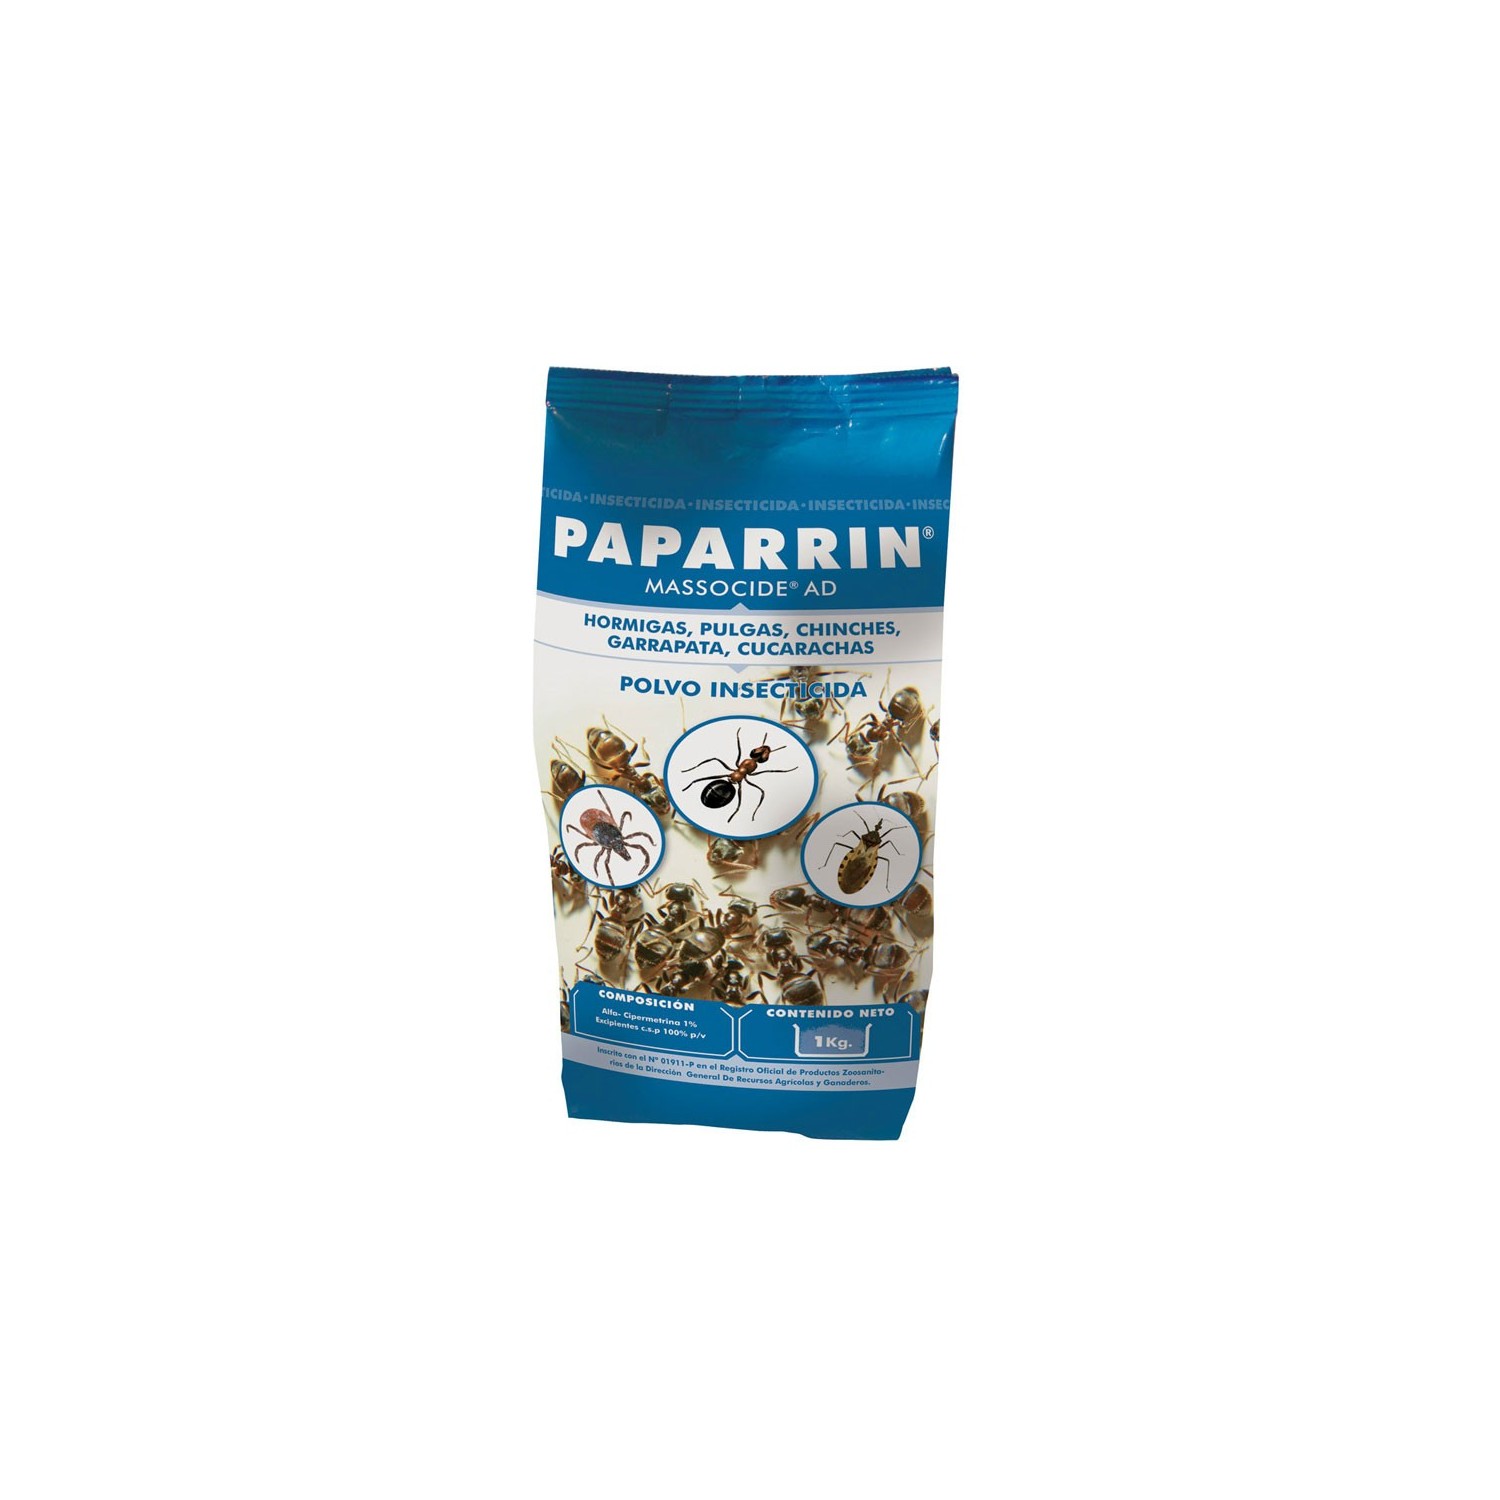 PAPARRIN POLVO INSECTICIDA 1KG